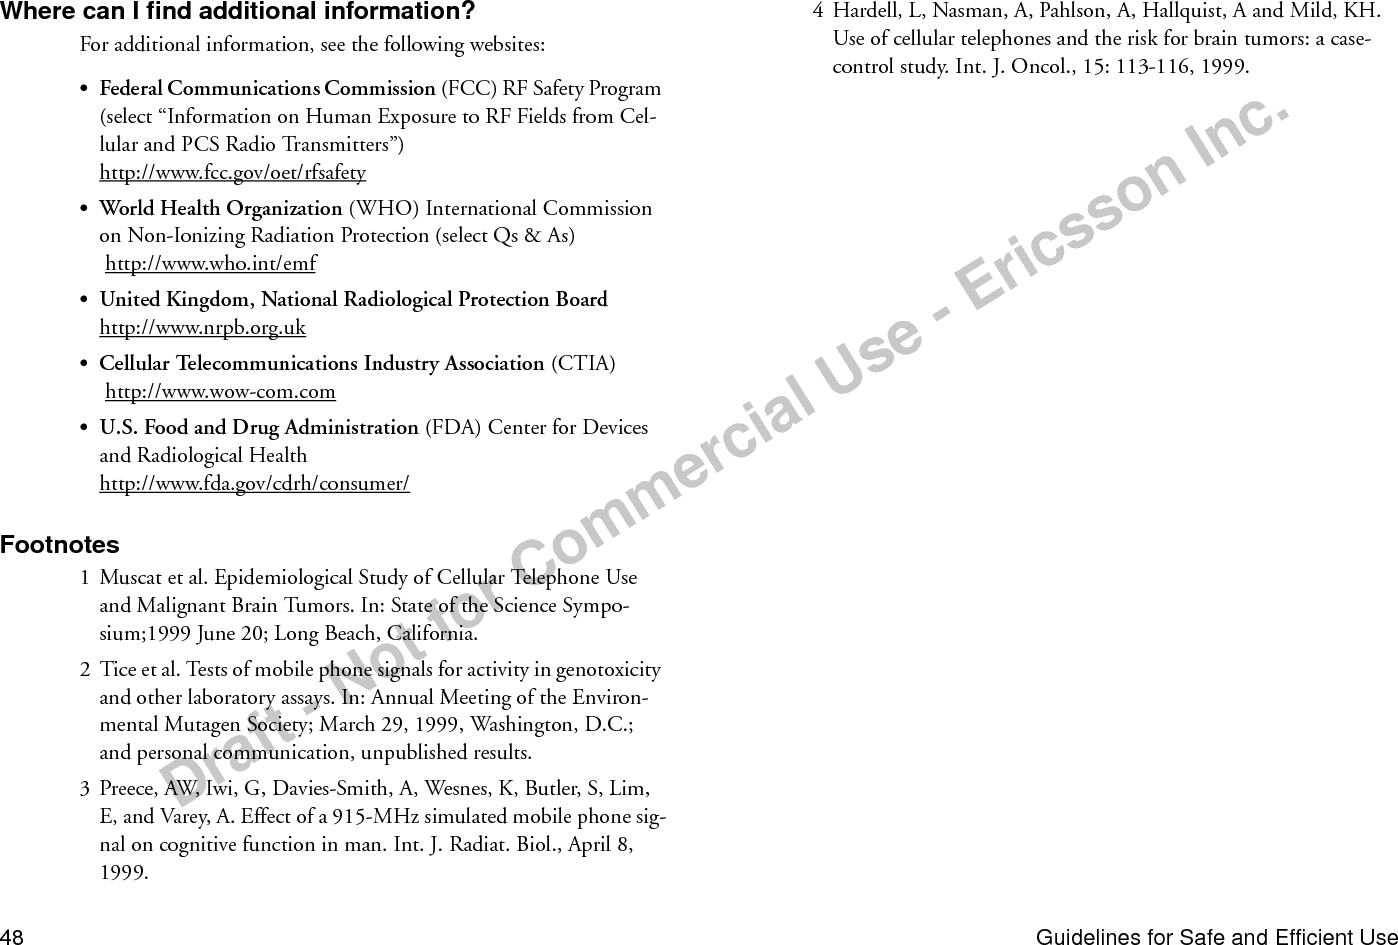 Draft - Not for Commercial Use - Ericsson Inc.Guidelines for Safe and Efficient Use 49